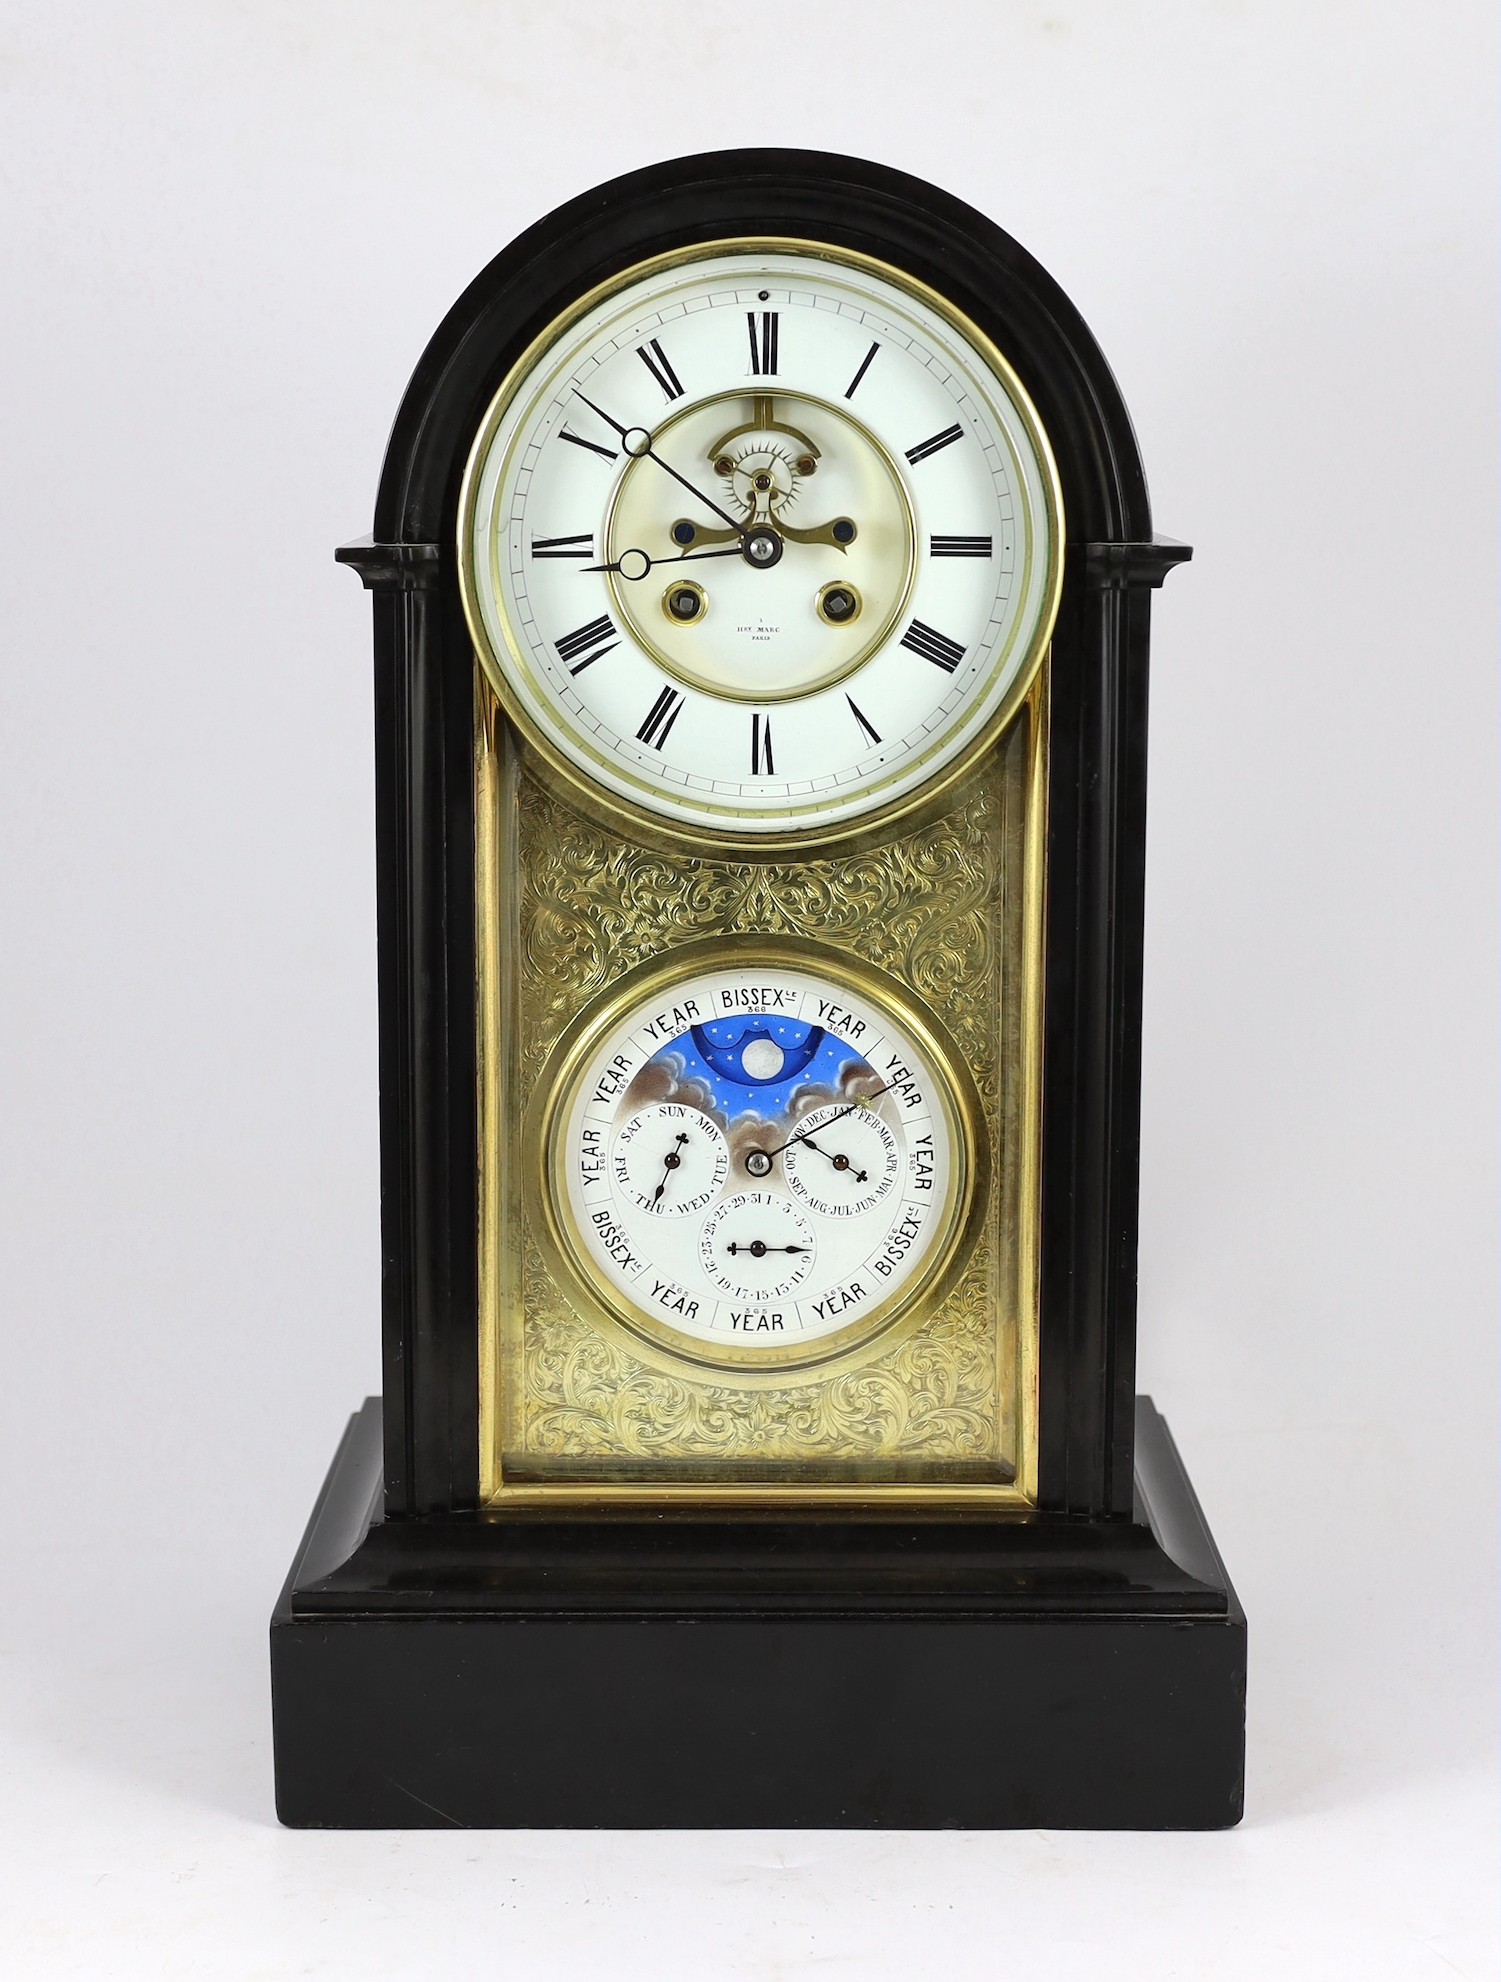 Henri Marc, Paris. A 19th century French arched top black marble mantel clock with perpetual calendar, width 28.5cm depth 20cm height 49cm